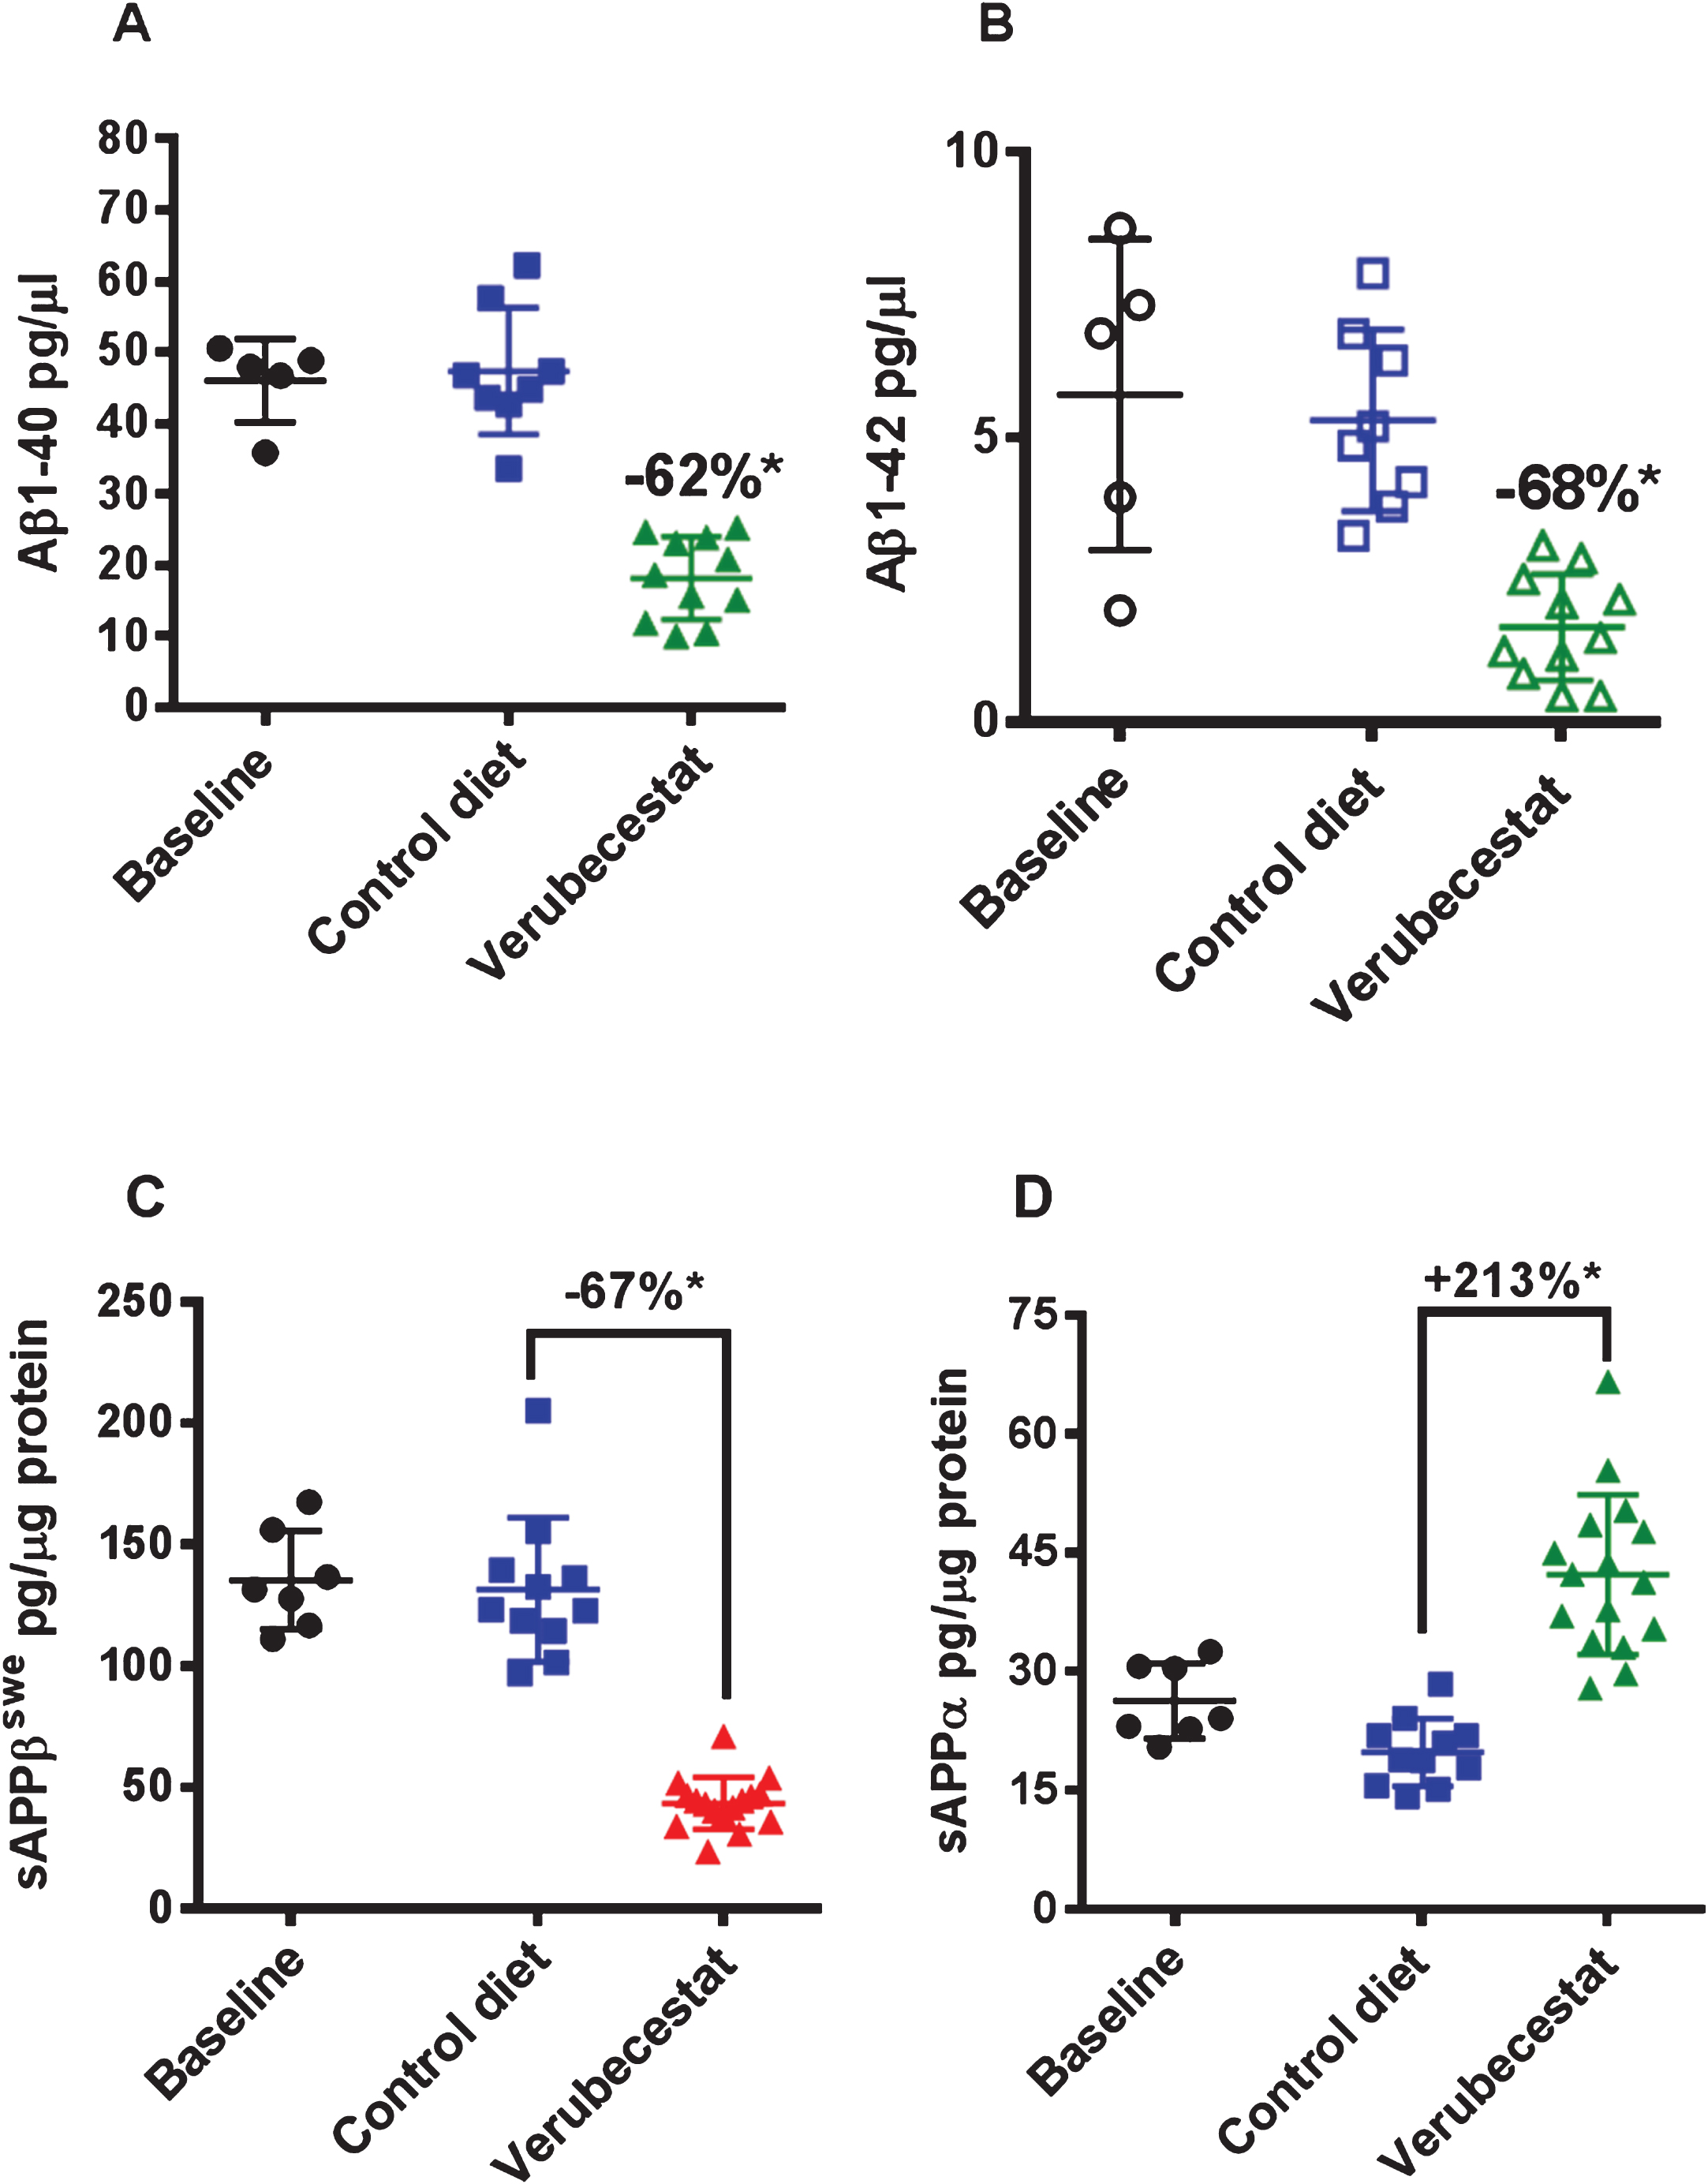 CSF Aβ1 - 40 (A) and Aβ1 - 42 (B) and brain sAβPPβswe (C) and sAβPPα (D) levels in aged Tg2576 mice at baseline and following 12-weeks treatment with control vehicle diet or verubecestat diet at 110 mg/kg/day. *p < 0.0001 versus vehicle diet-treated mice; two-tailed t-test. Data are plotted as mean±sd.